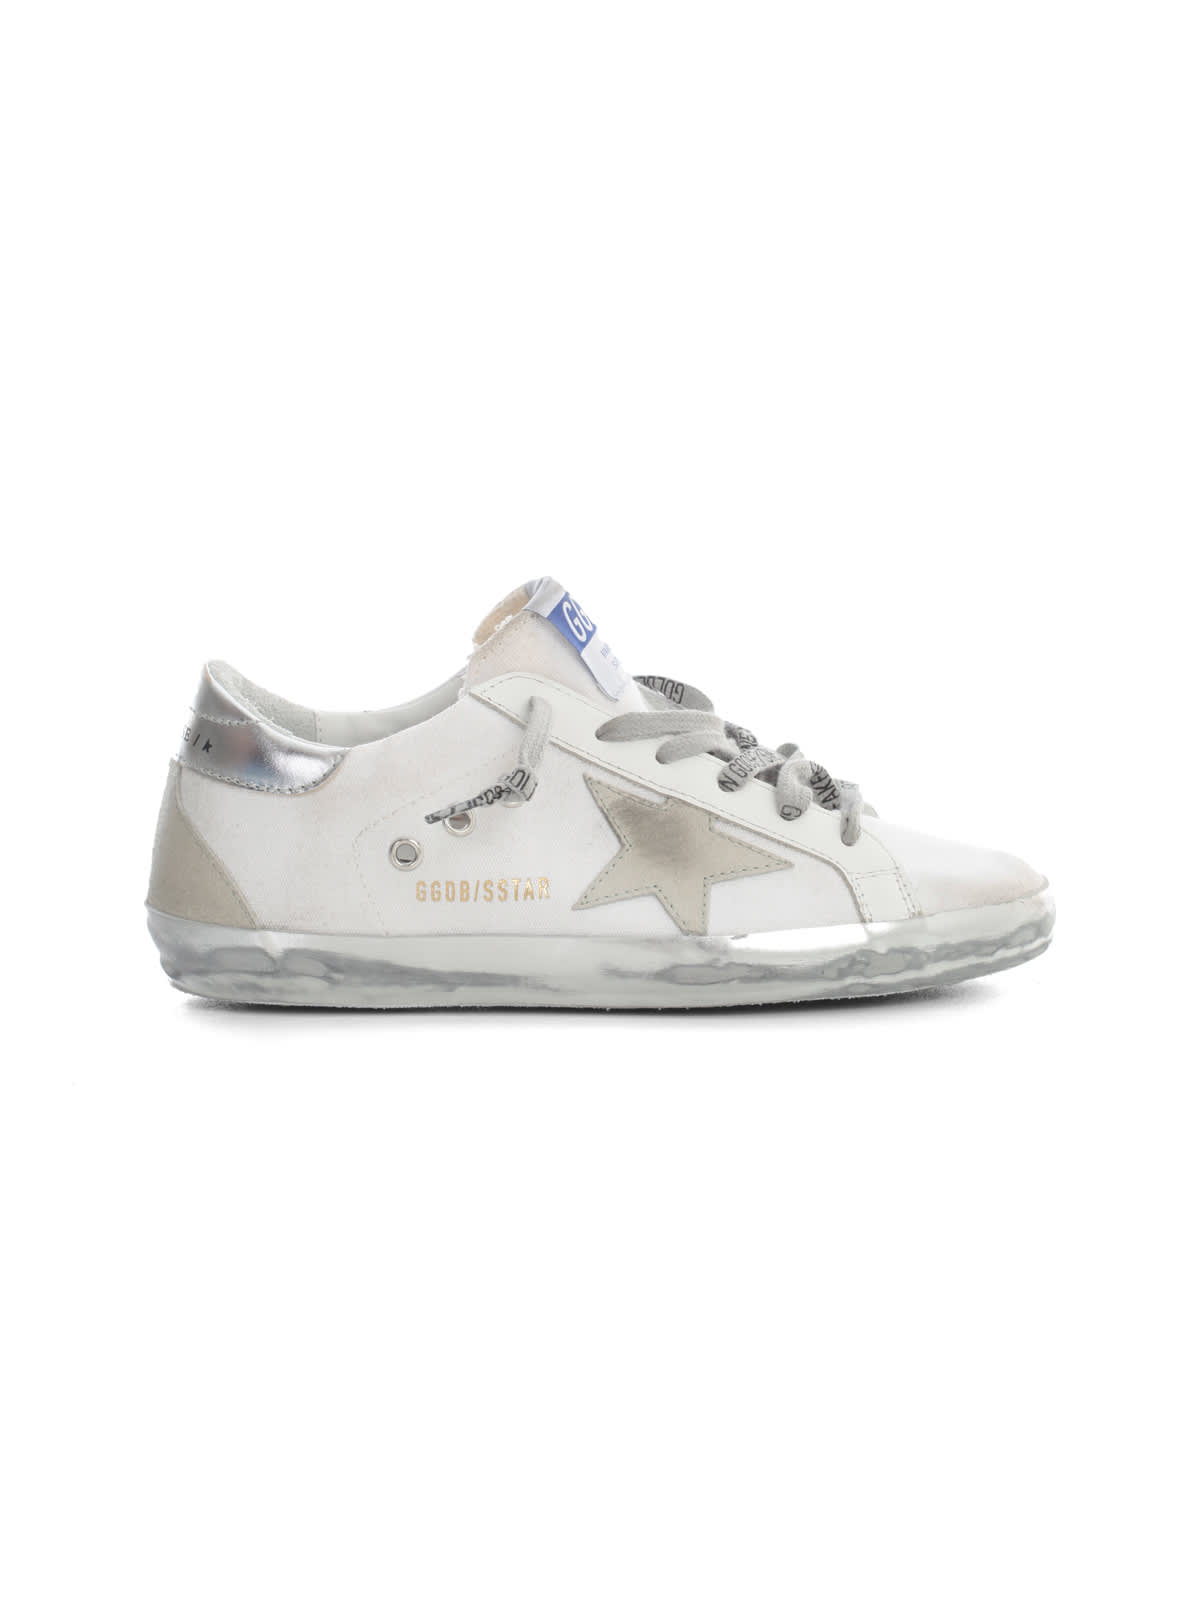 Buy Golden Goose Super-star Canvas Upper Suede Star And Spur Laminated Heel Sparkle online, shop Golden Goose shoes with free shipping